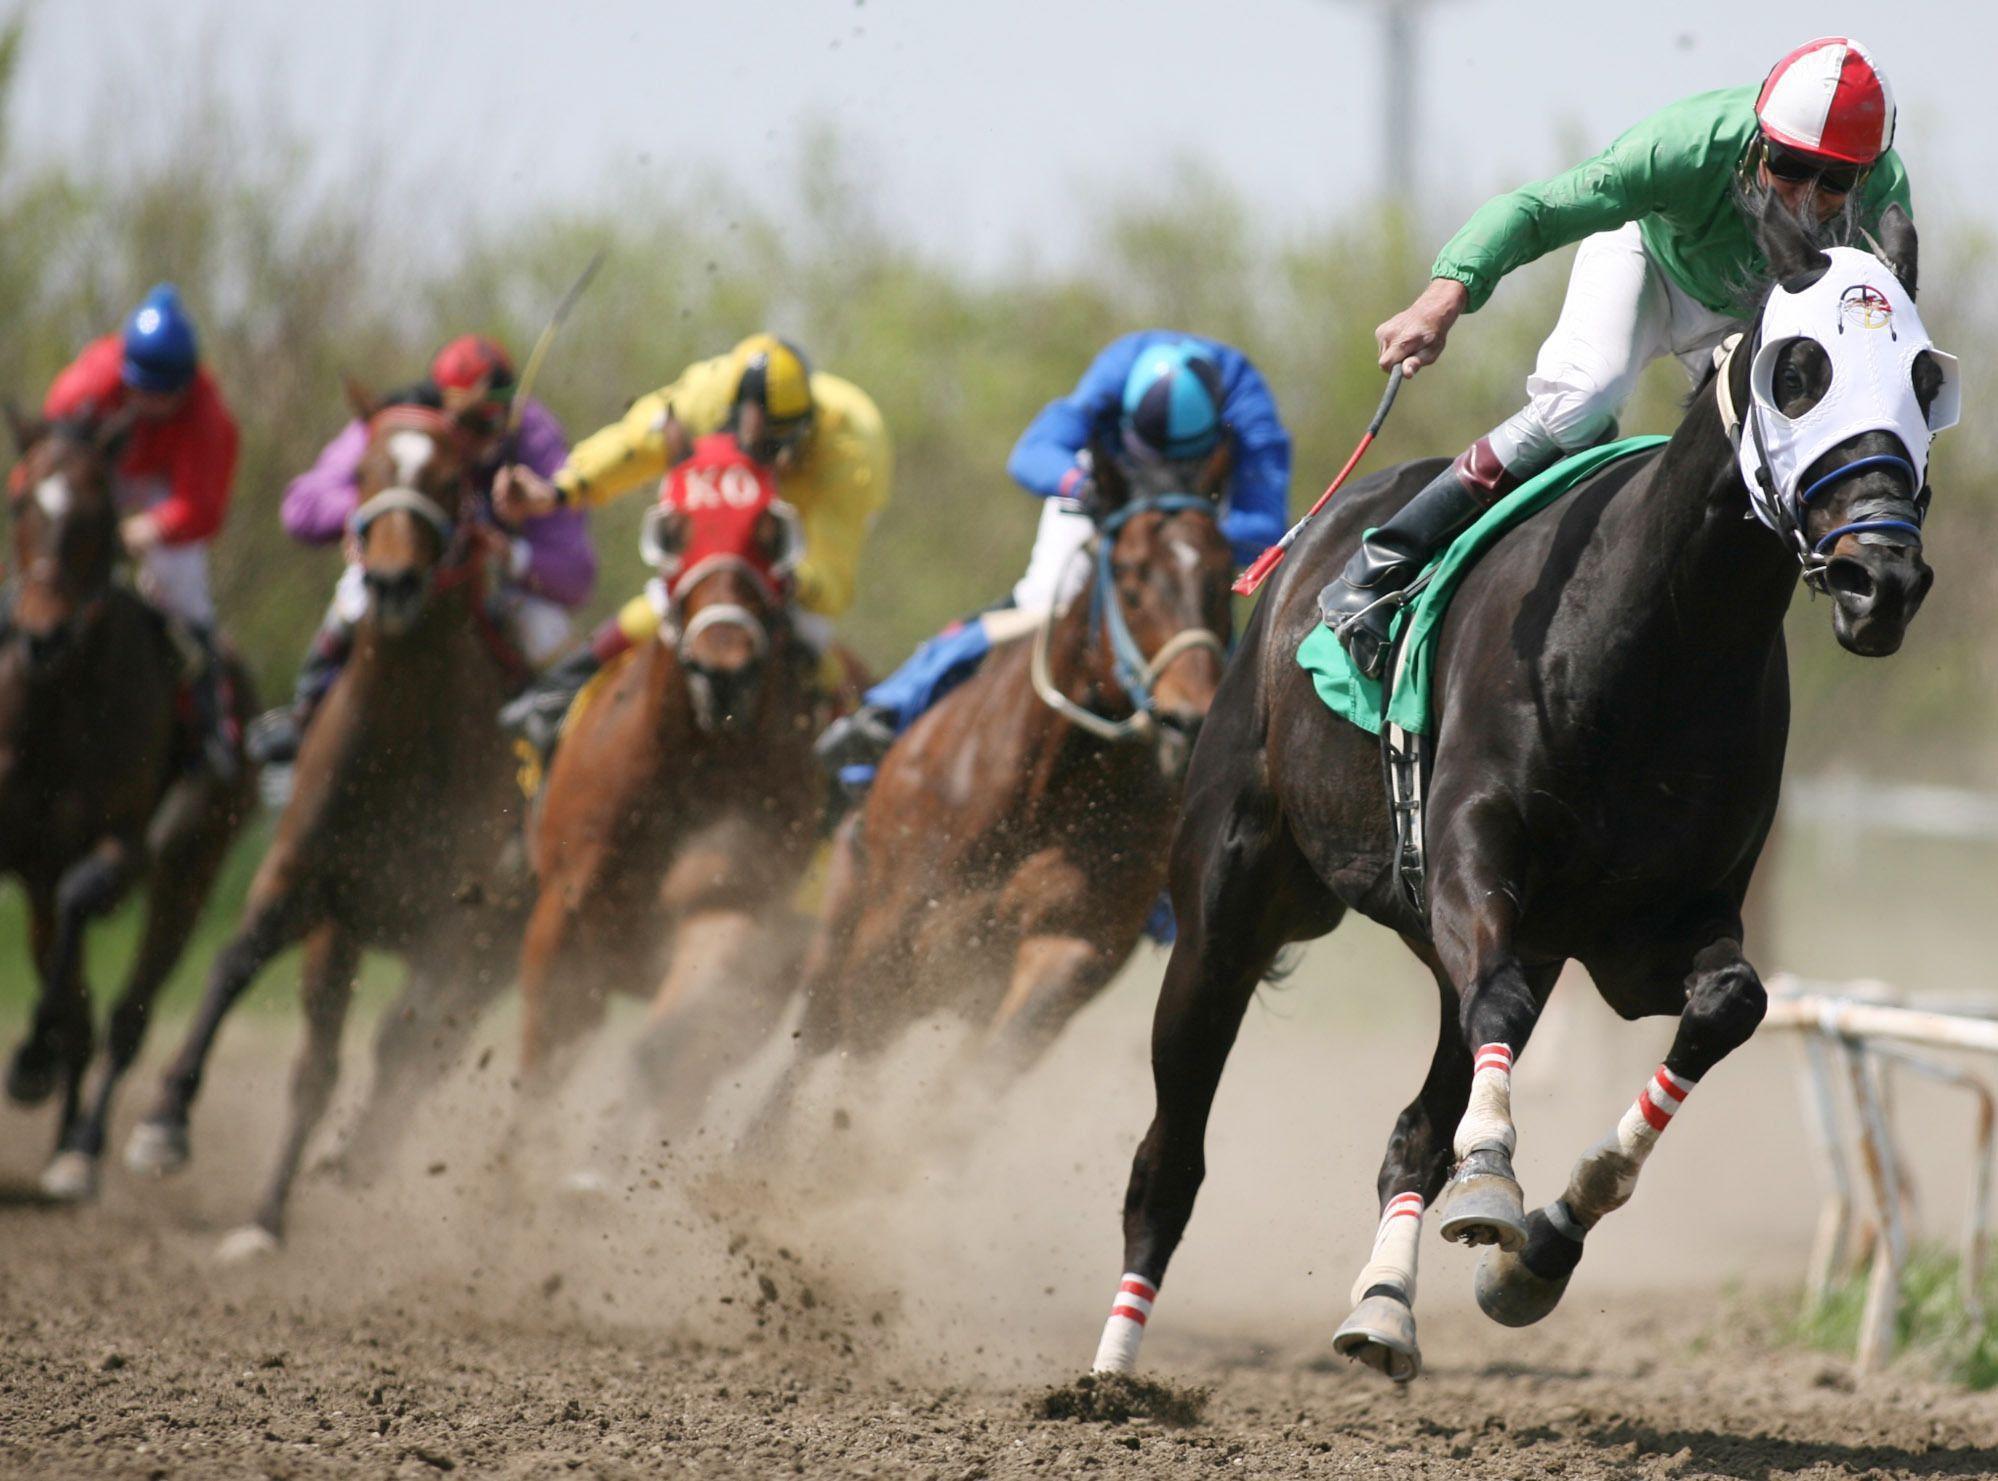 Horse race wallpaper and image, picture, photo